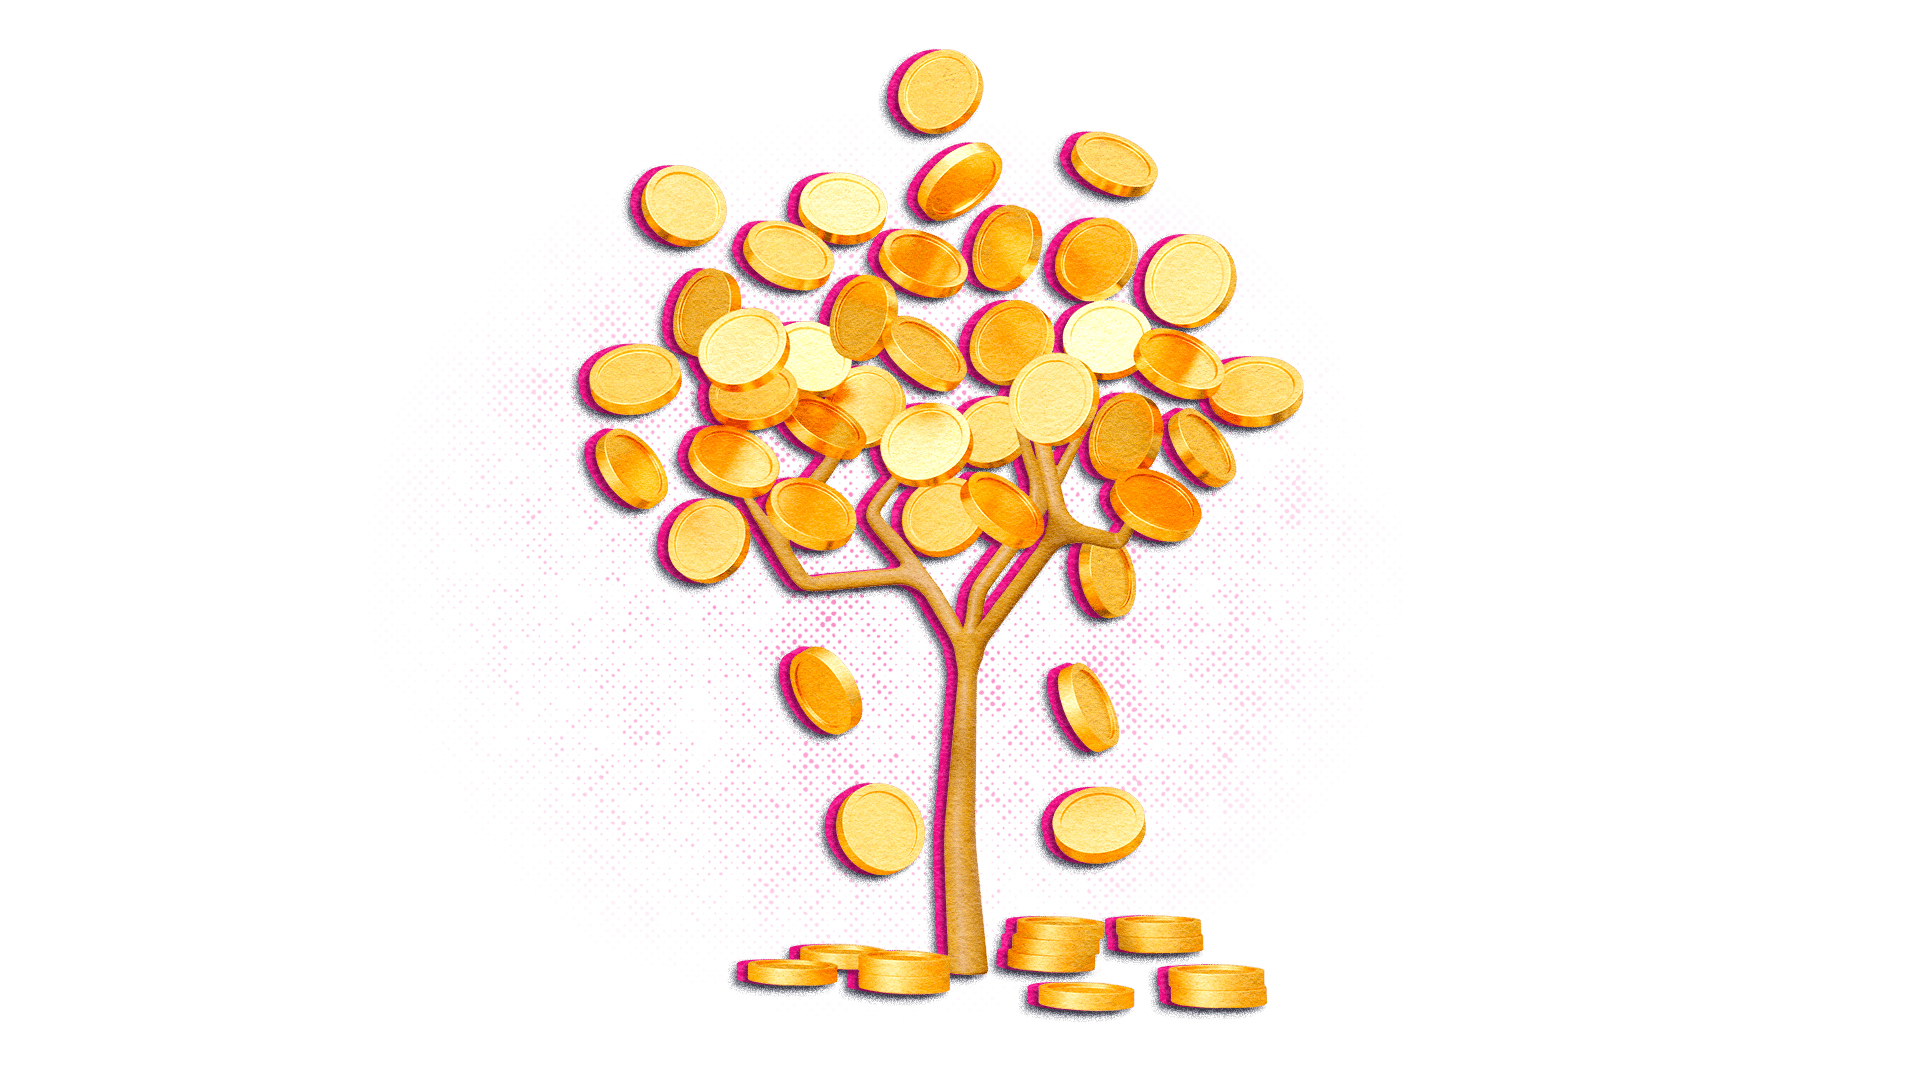 Graphic of a tree with coins for leaves.